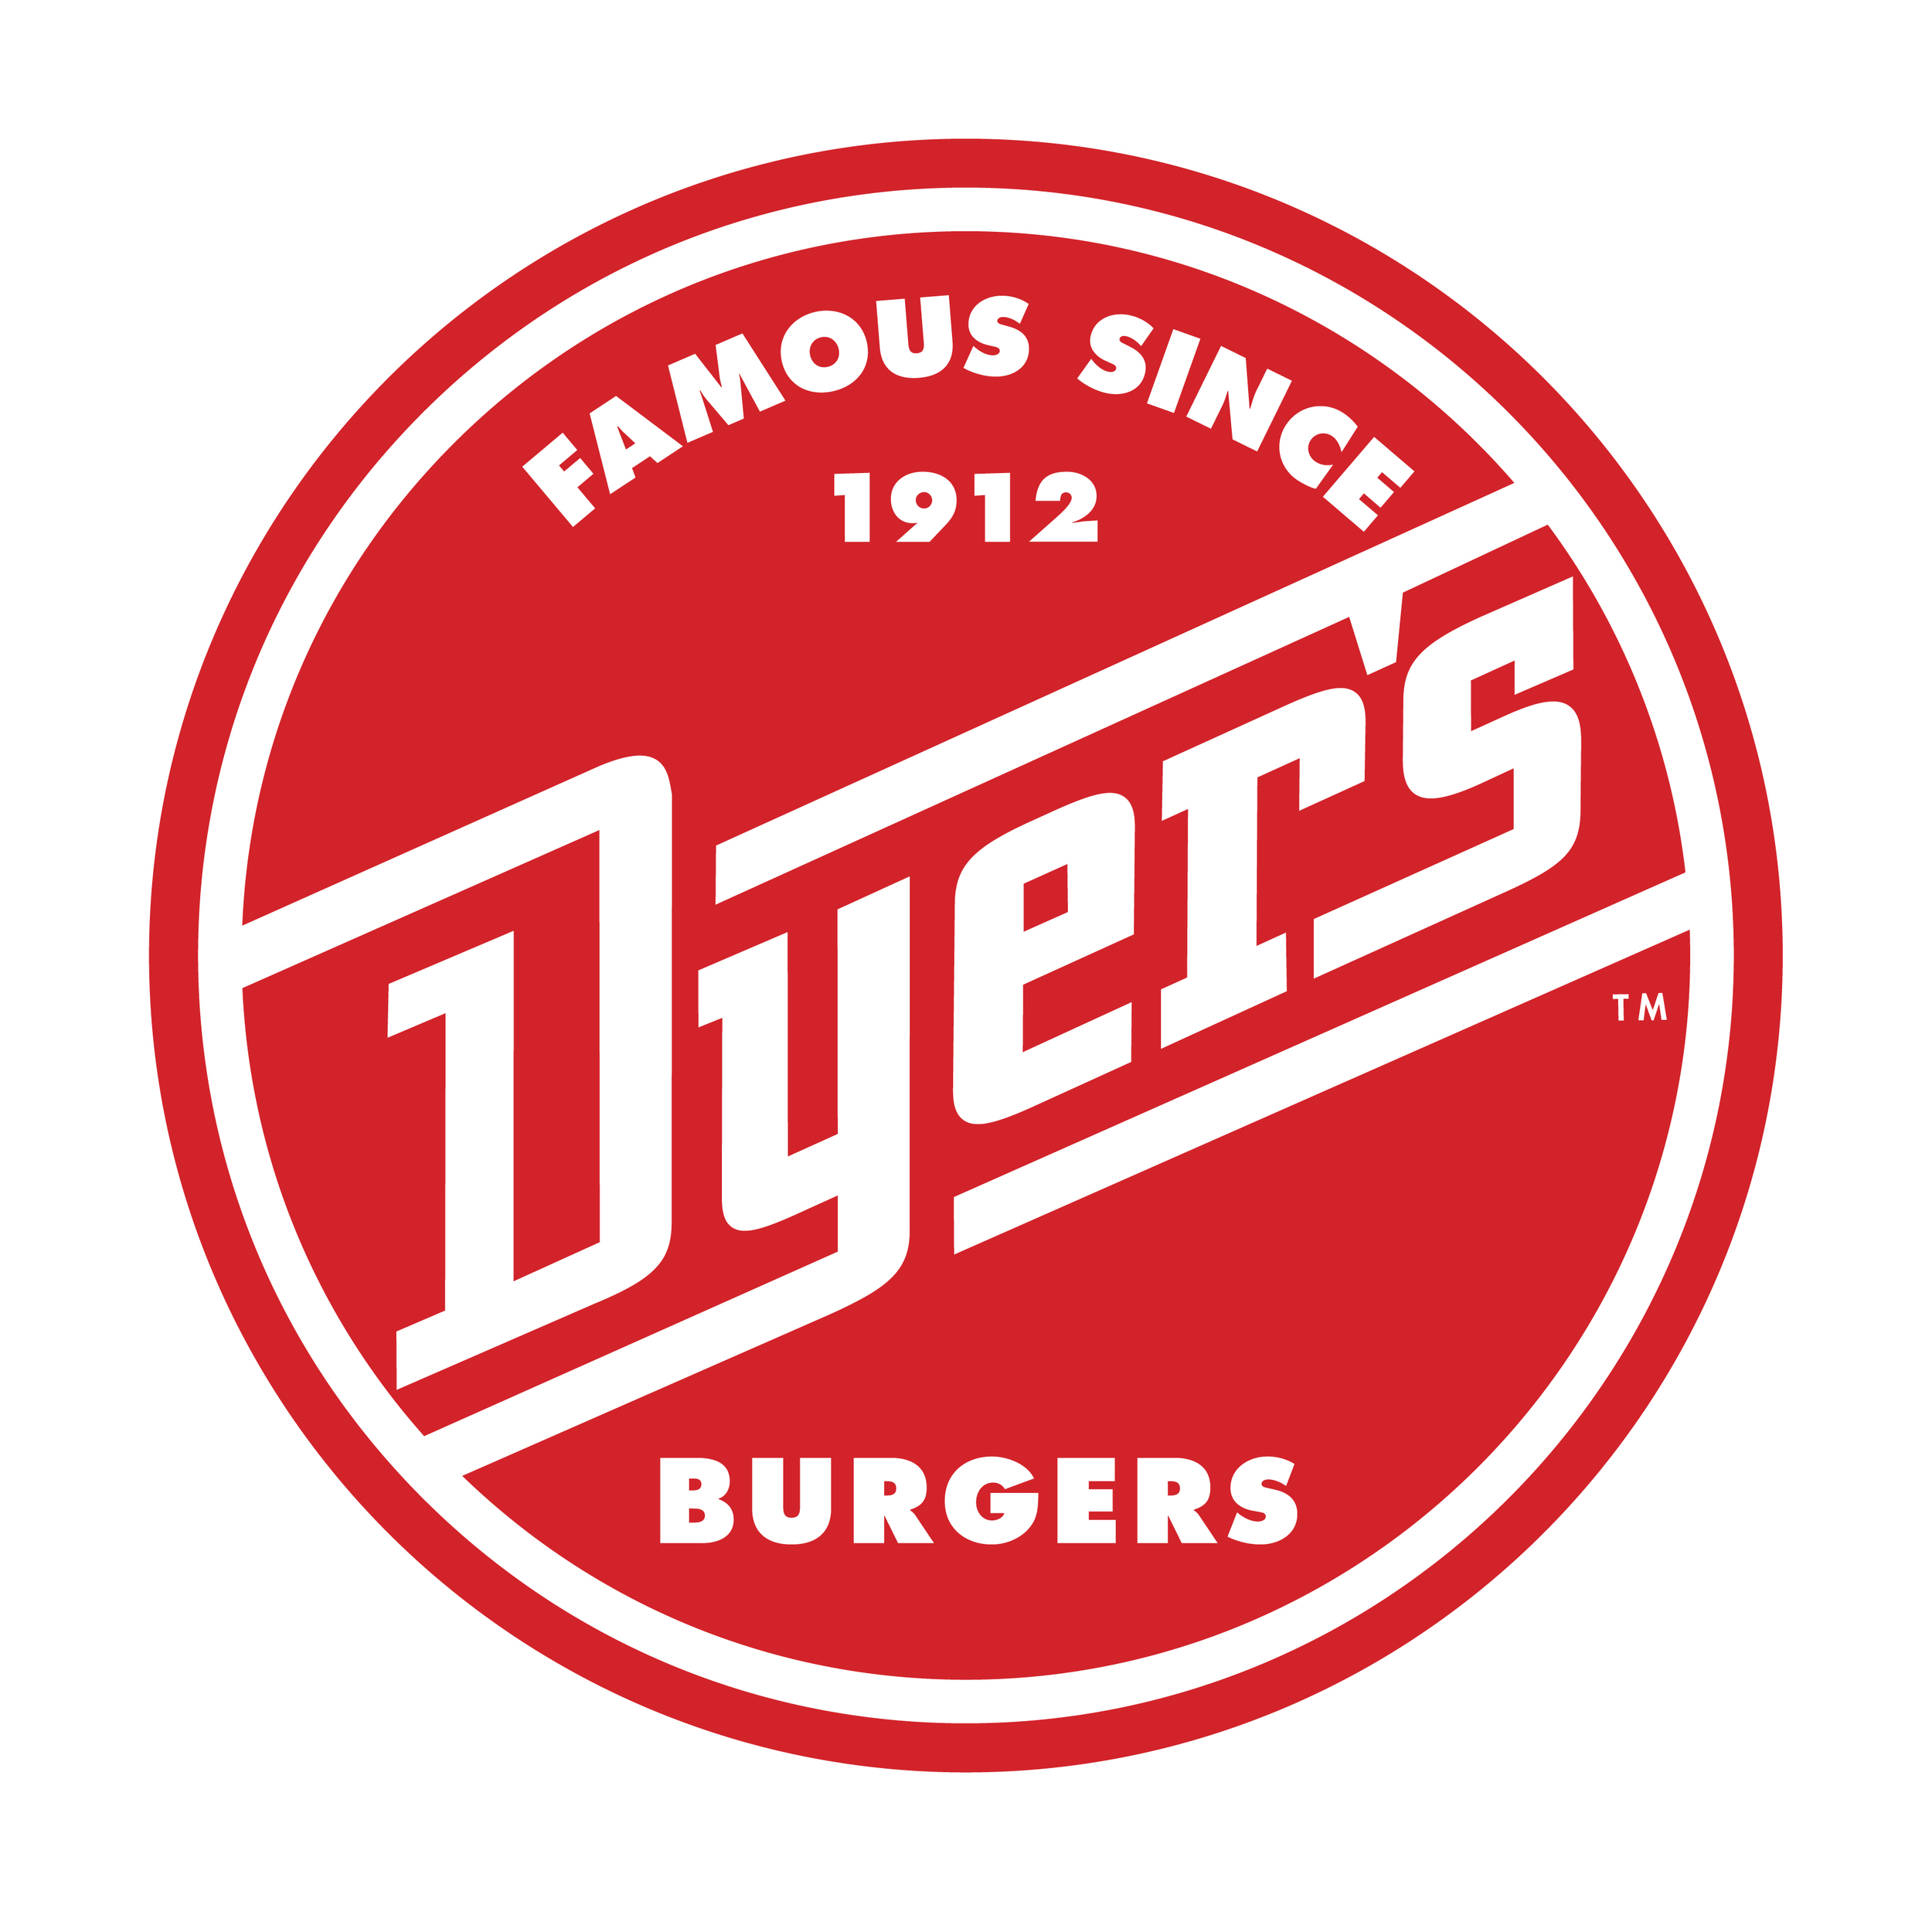  Dyer’s Burgers logo  Branding creative and design by Chuck Mitchell 